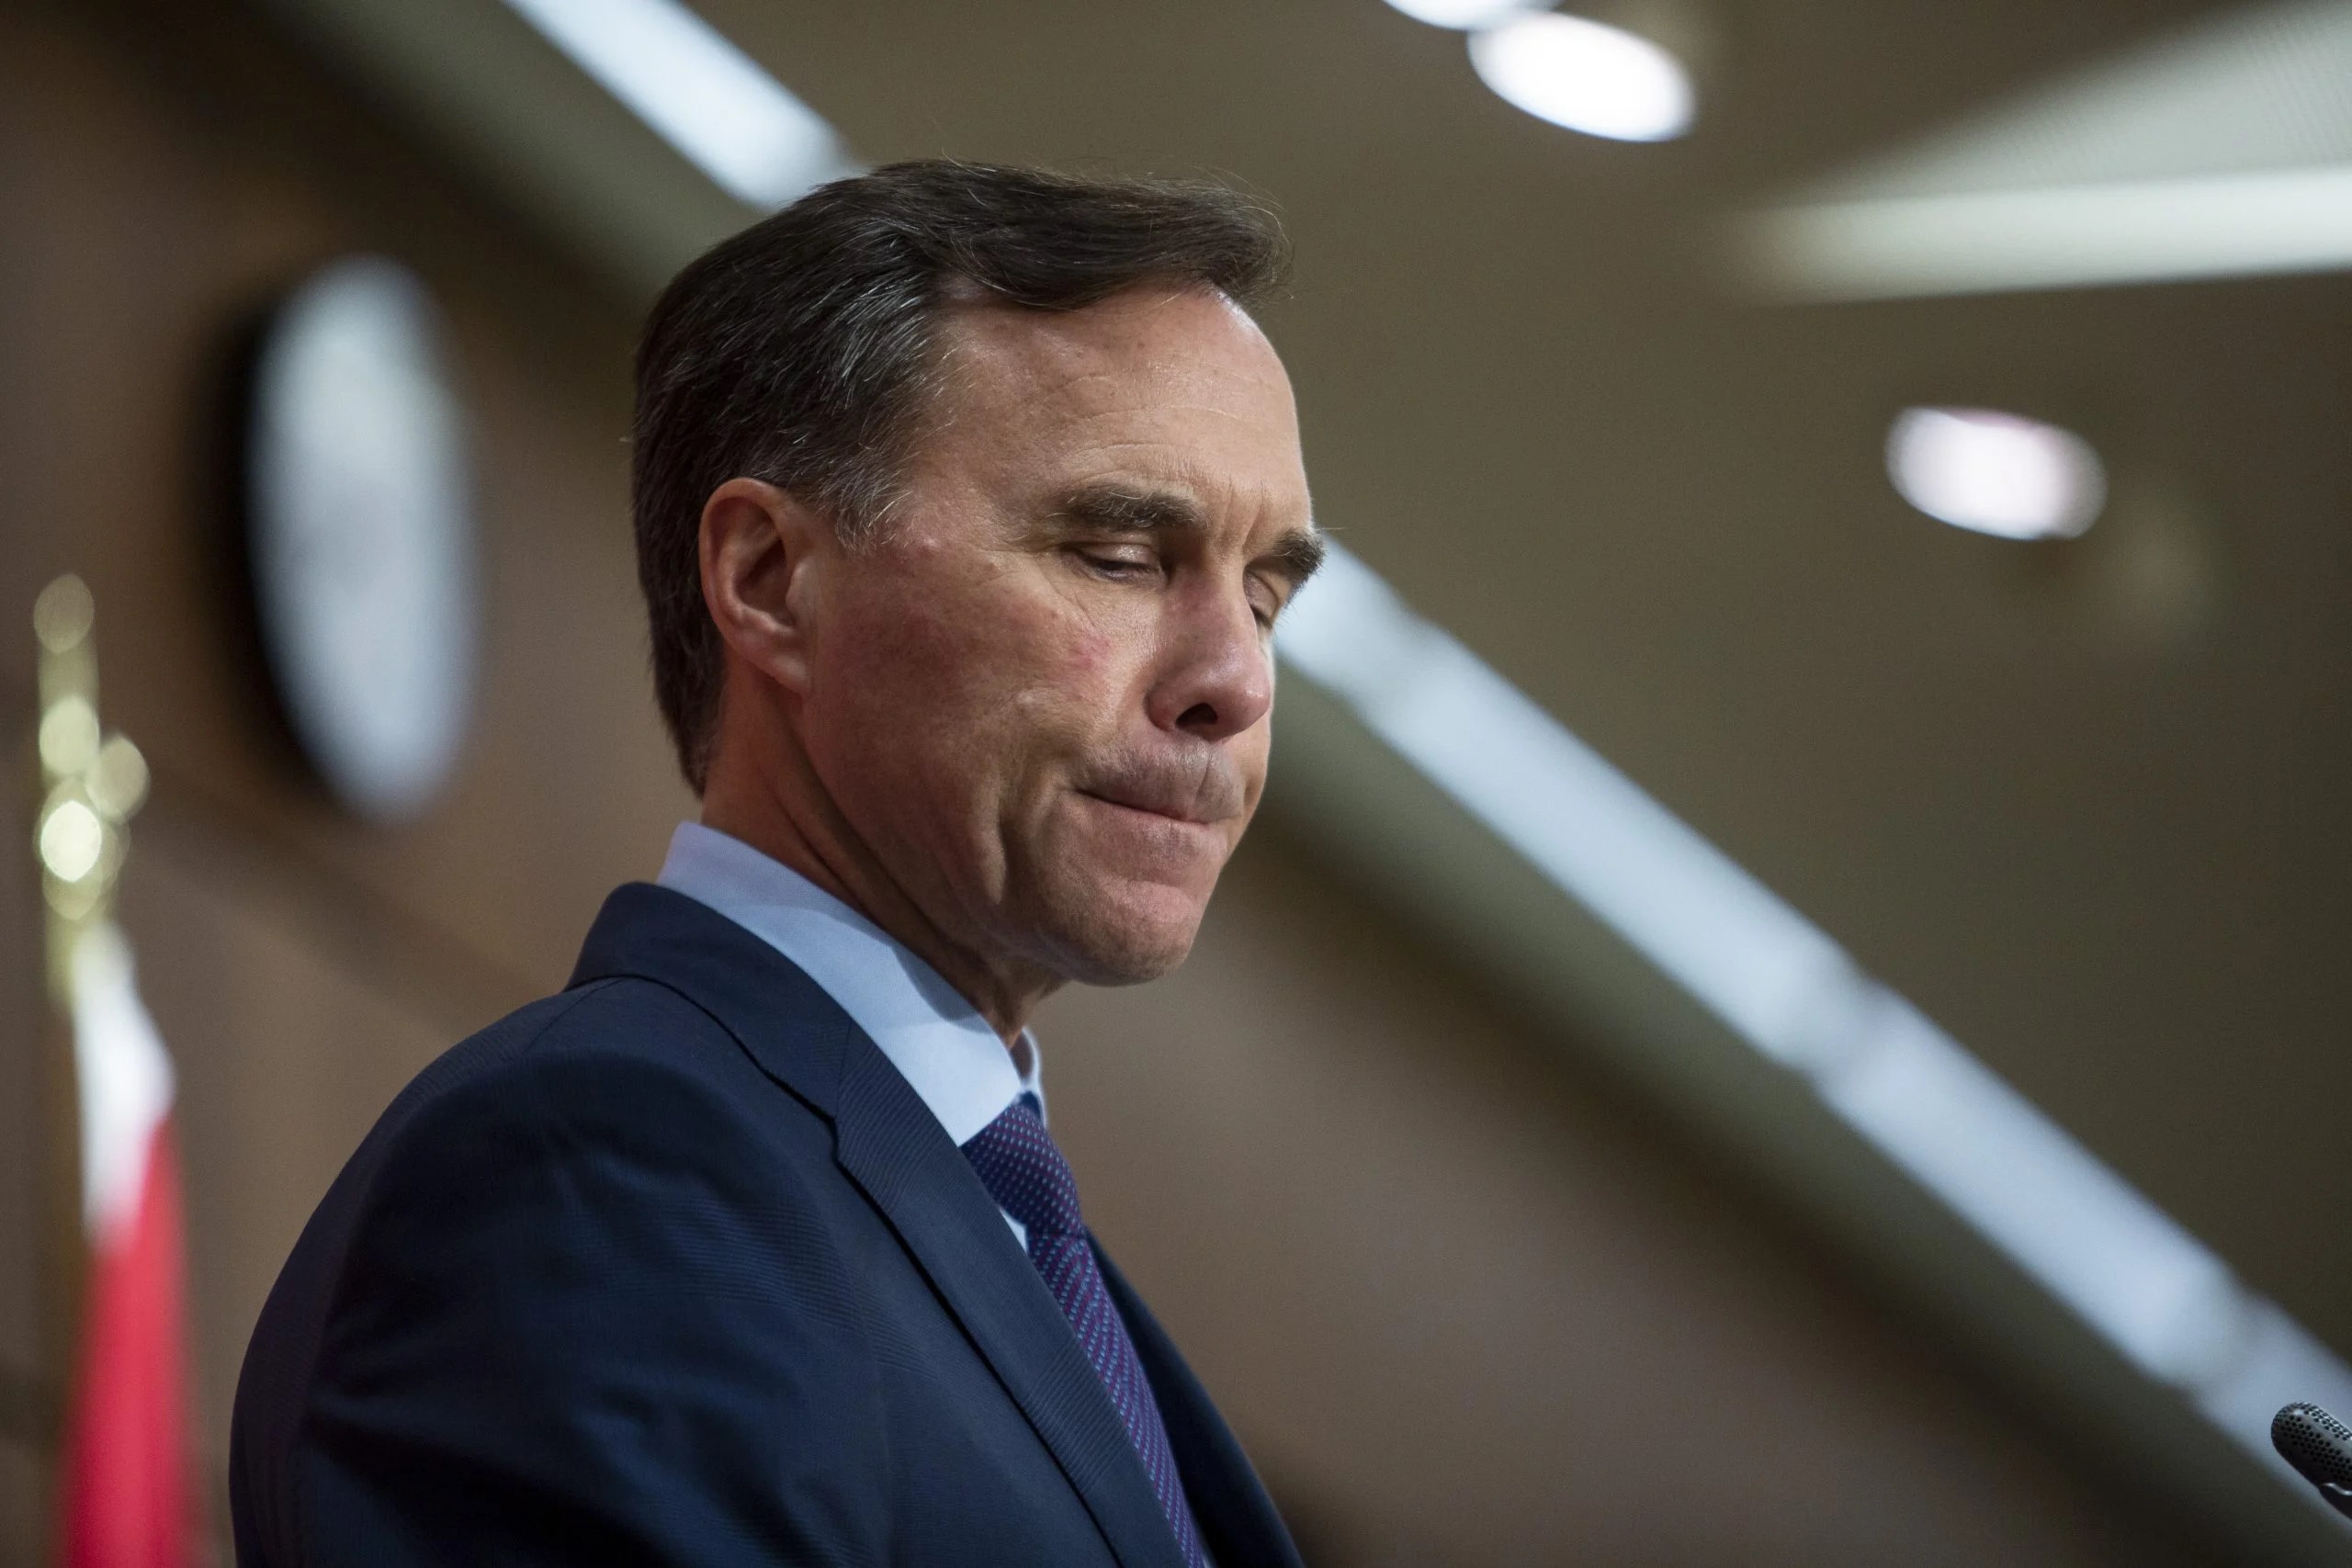 A photo of Bill Morneau wearing a suit and looking downward with his lips pursed.